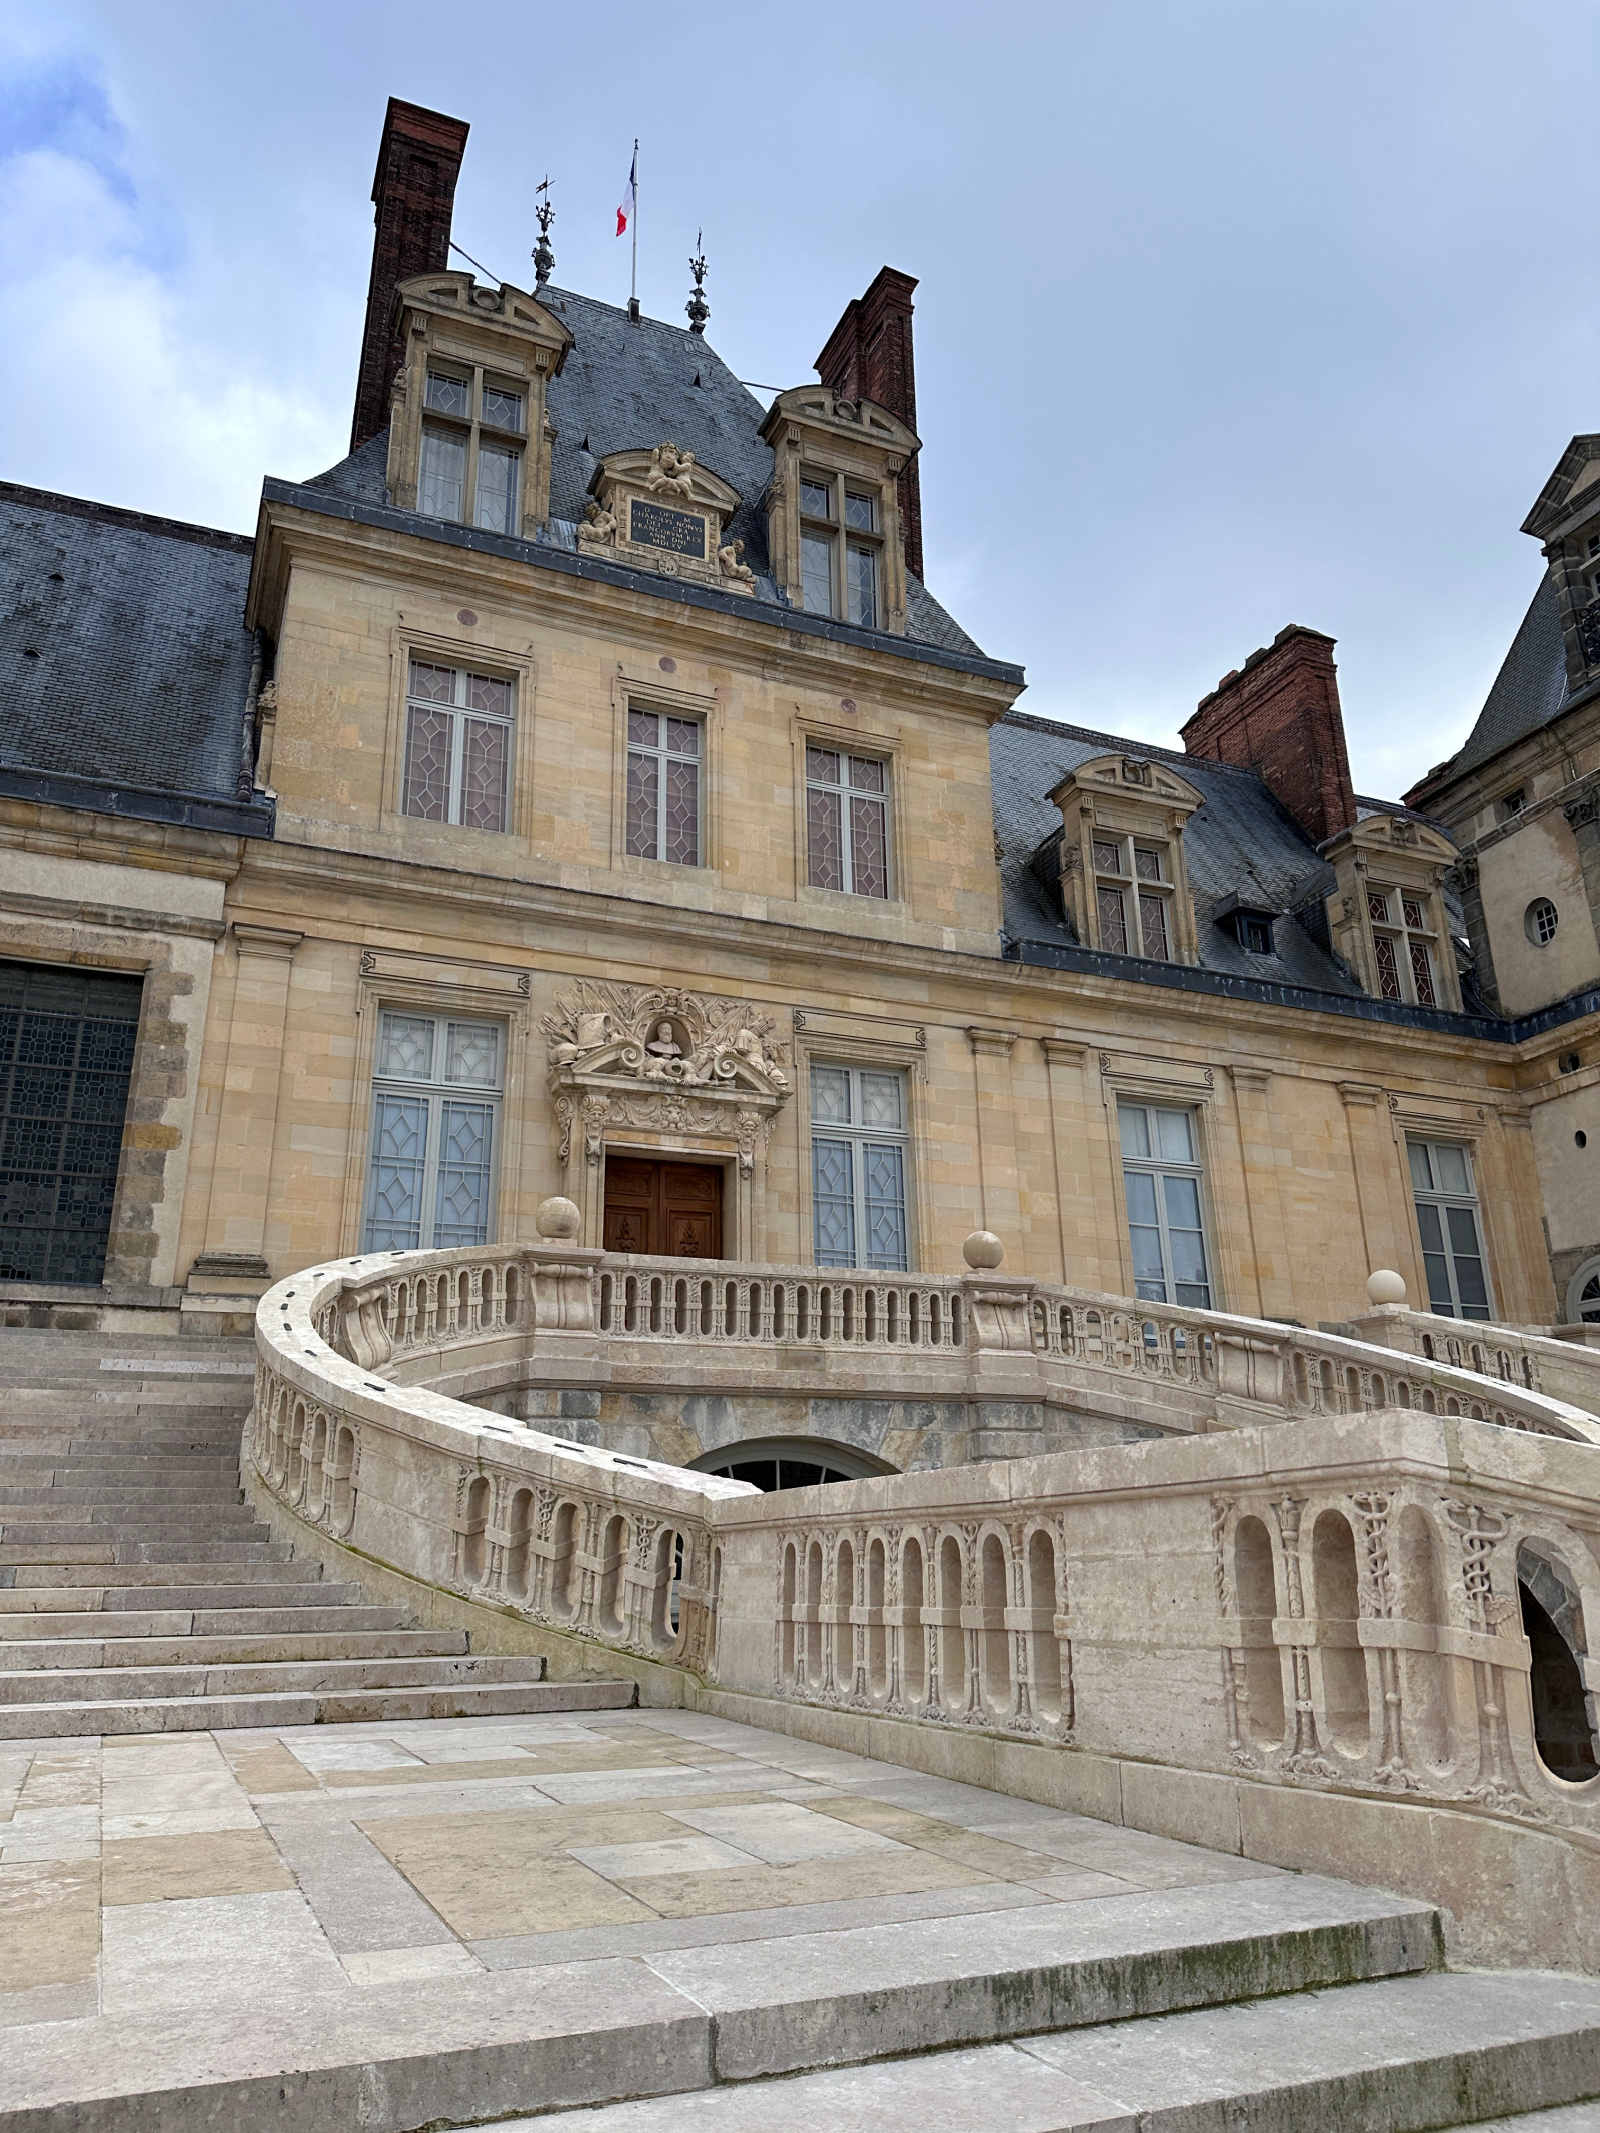 Paris to Fontainebleau Day Trip - wit & whimsy